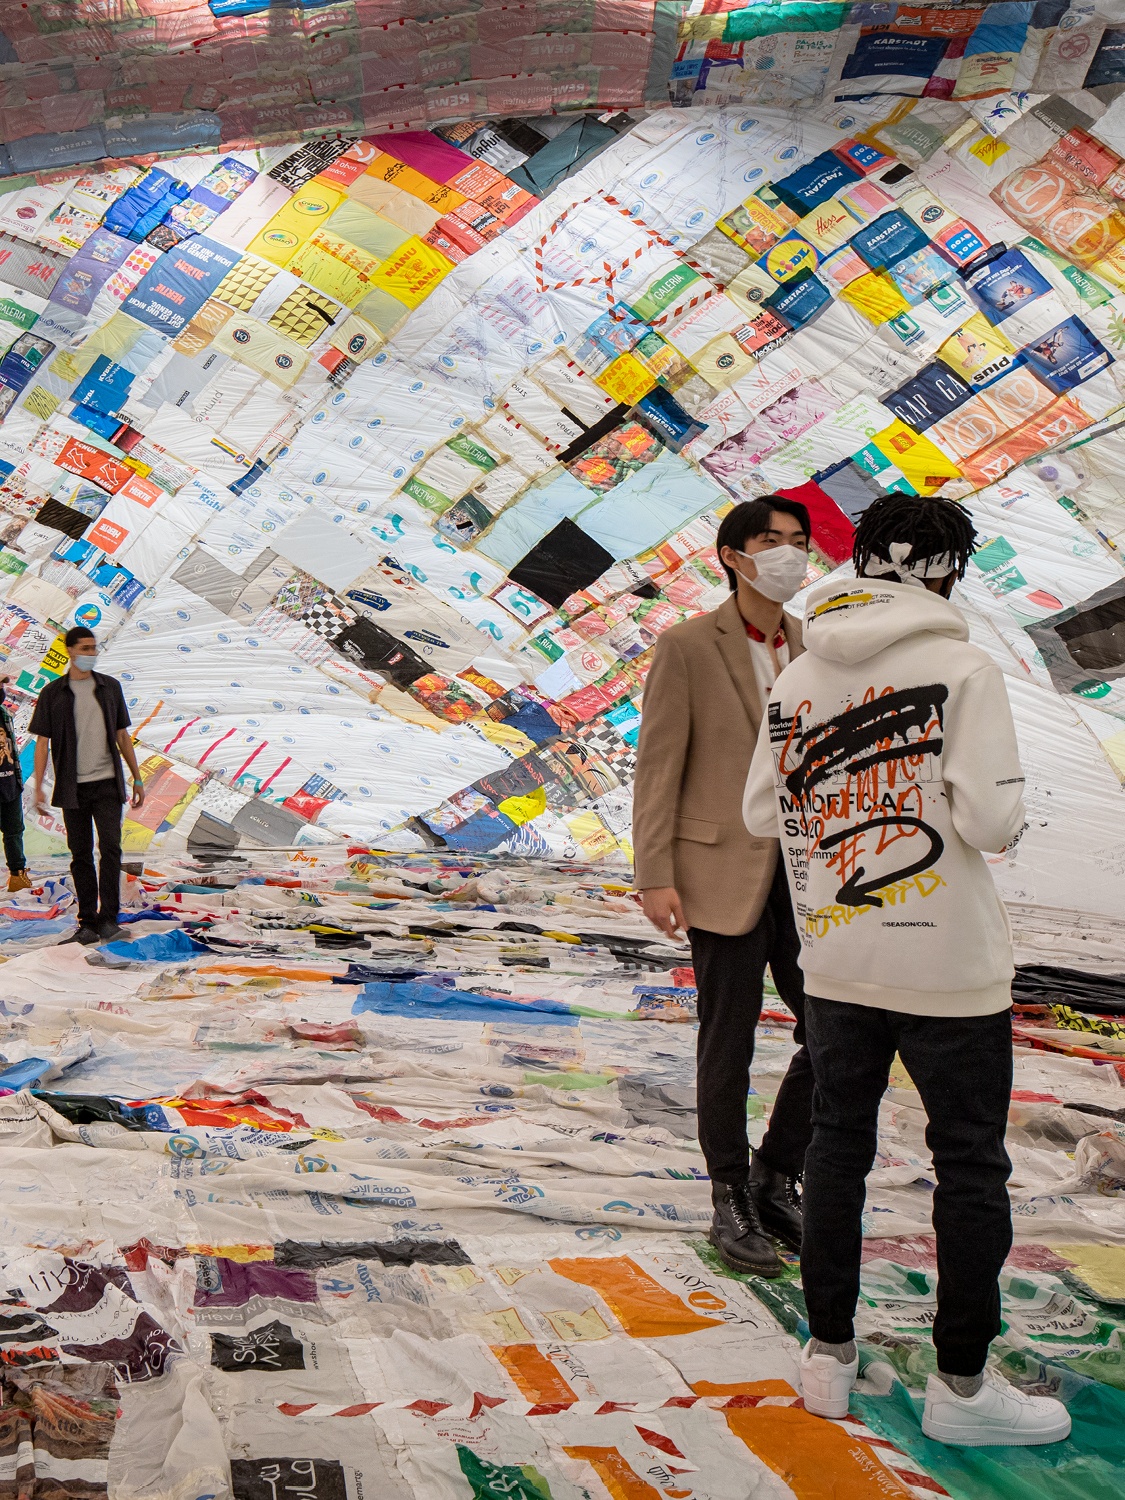 Three people stand inside a cavernous ballon made of a colorful patchwork of reused plastic bags quilted together with tape